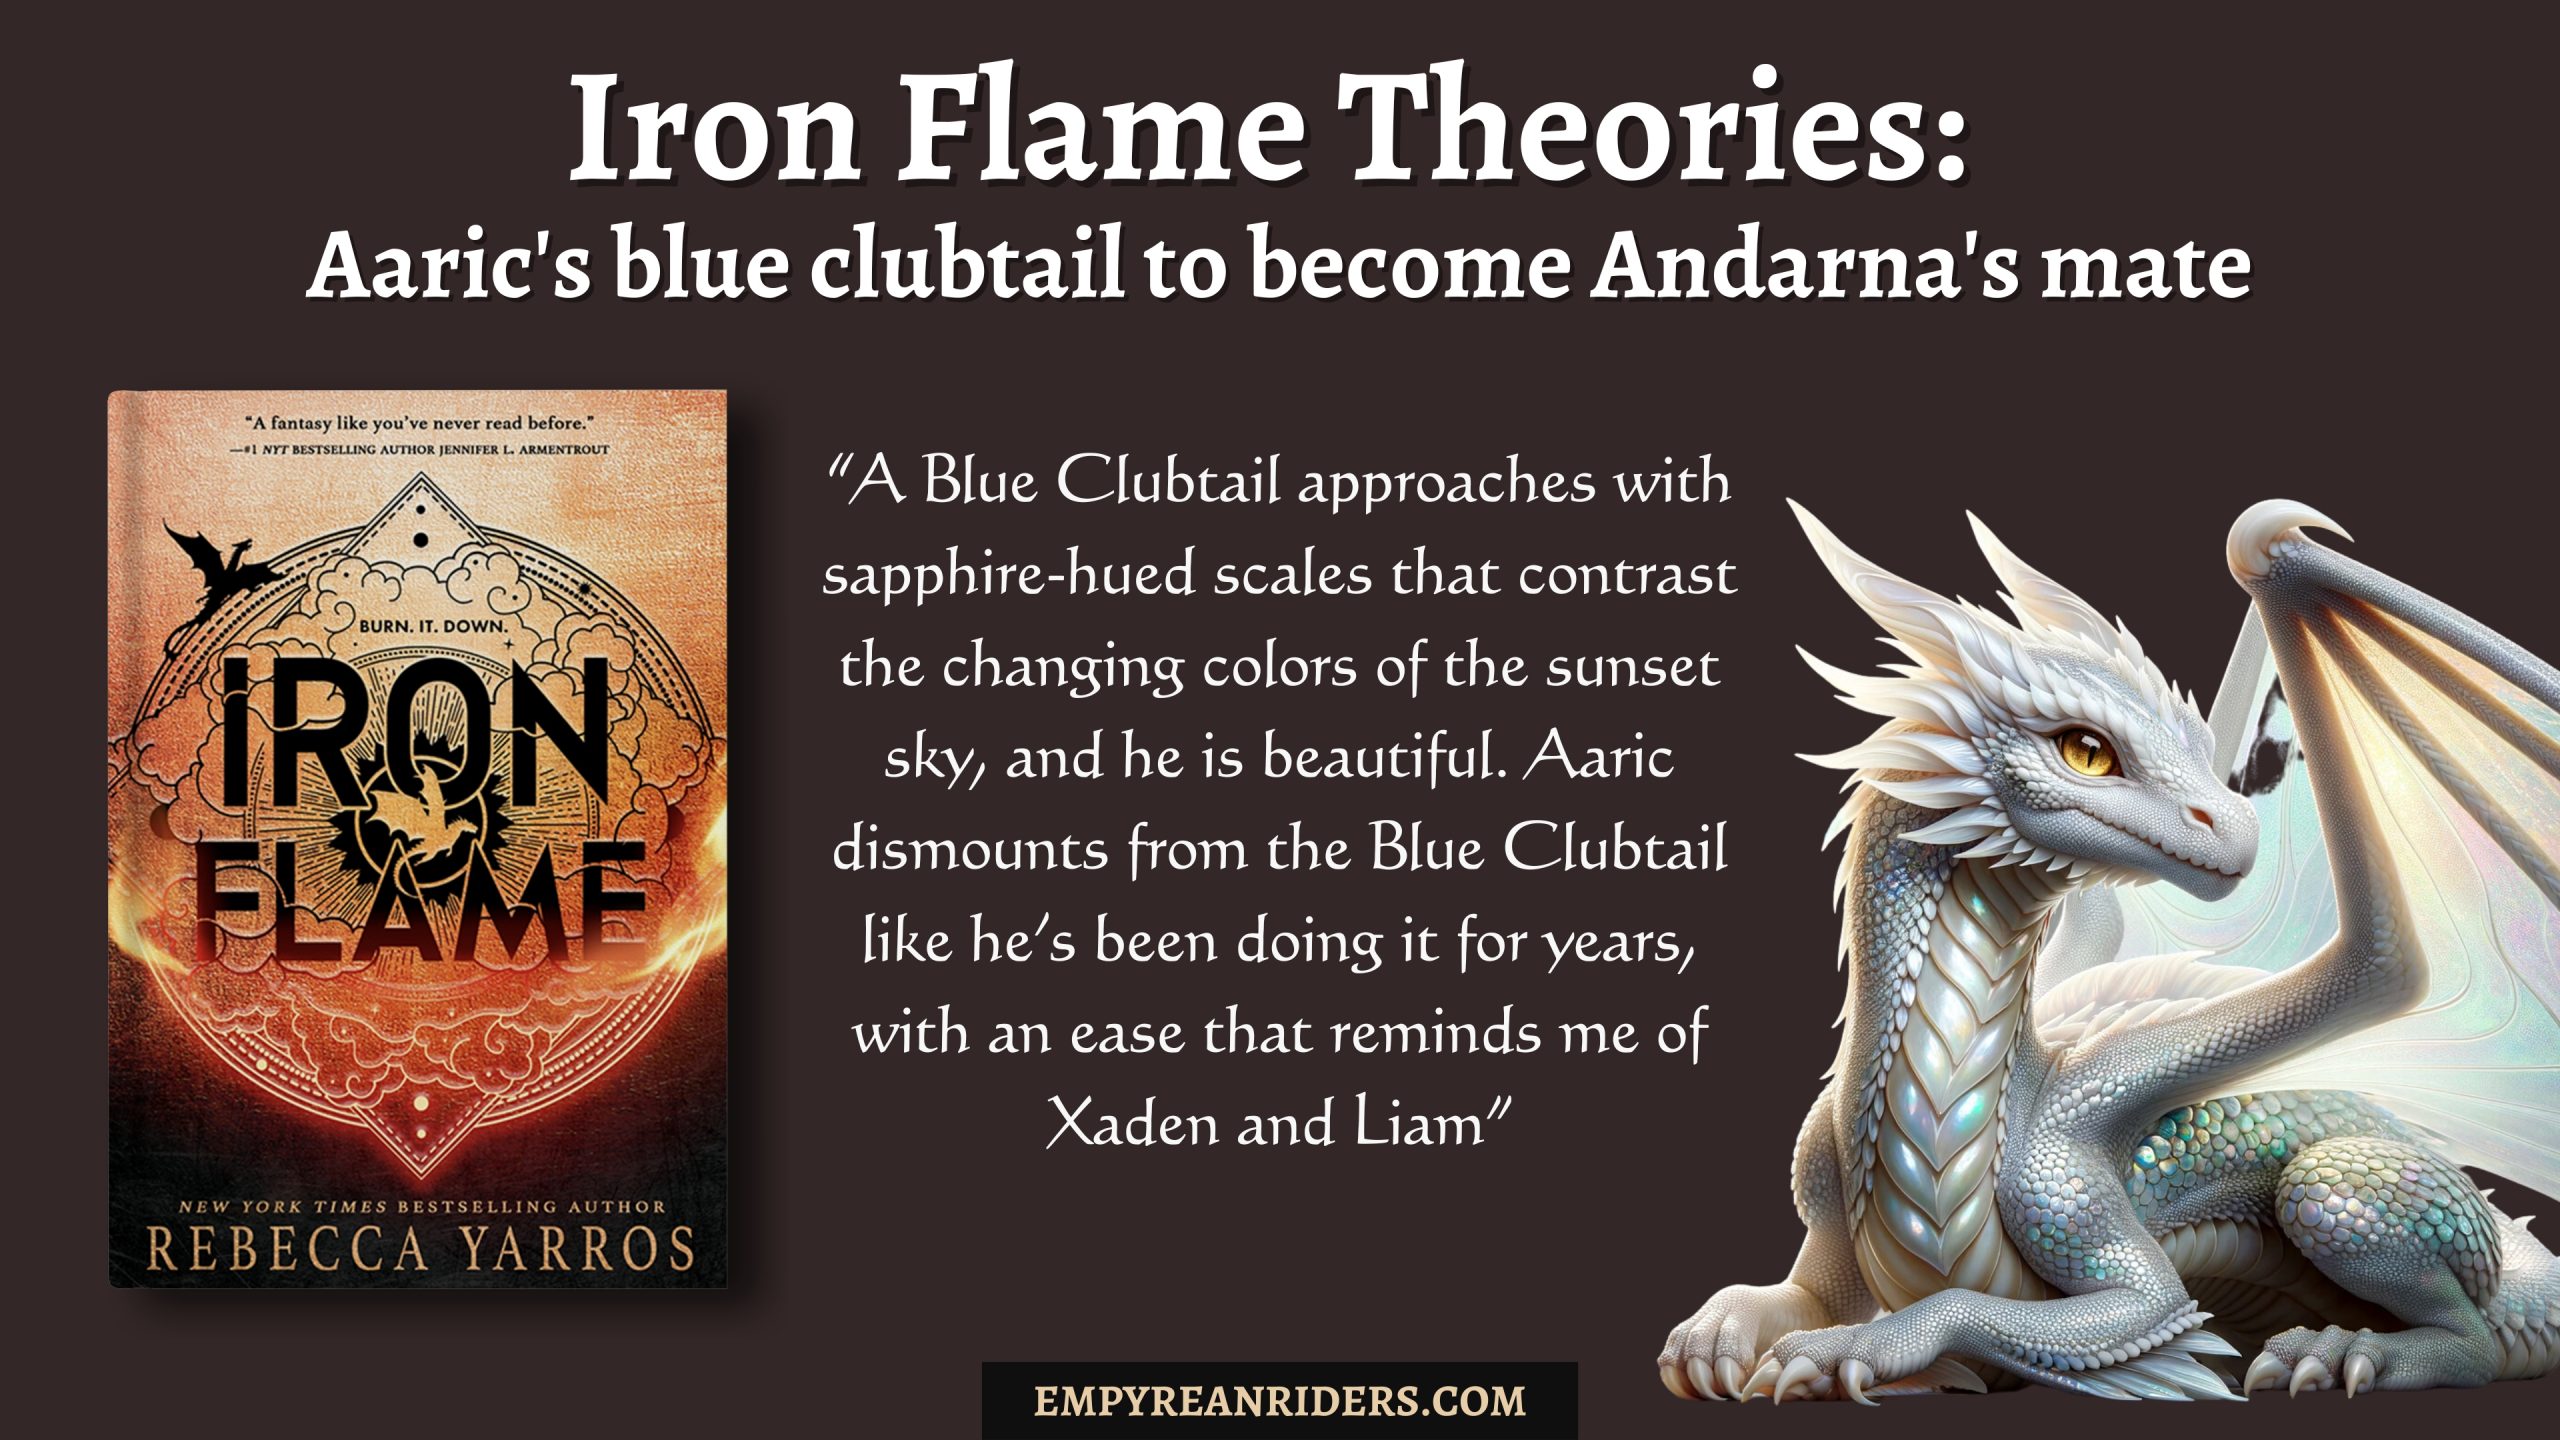 Iron Flame theory - Andarna will mate with Aaric's dragon